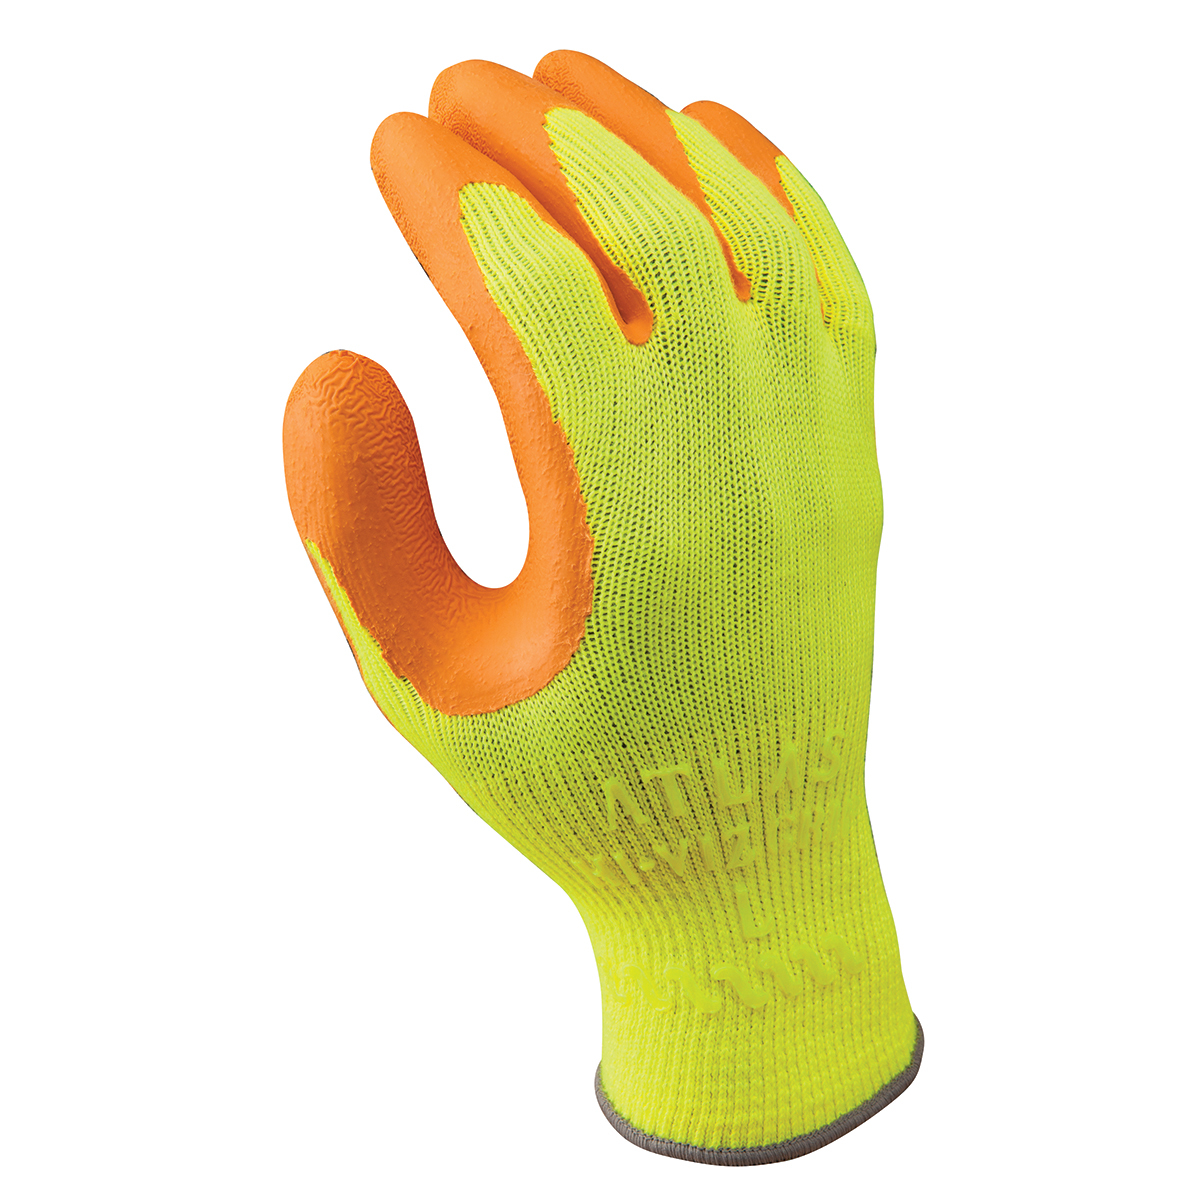 SHOWA® Size 10 ATLAS® 10 Gauge Natural Rubber Palm Coated Work Gloves With Cotton And Polyester Liner And Knit Wrist